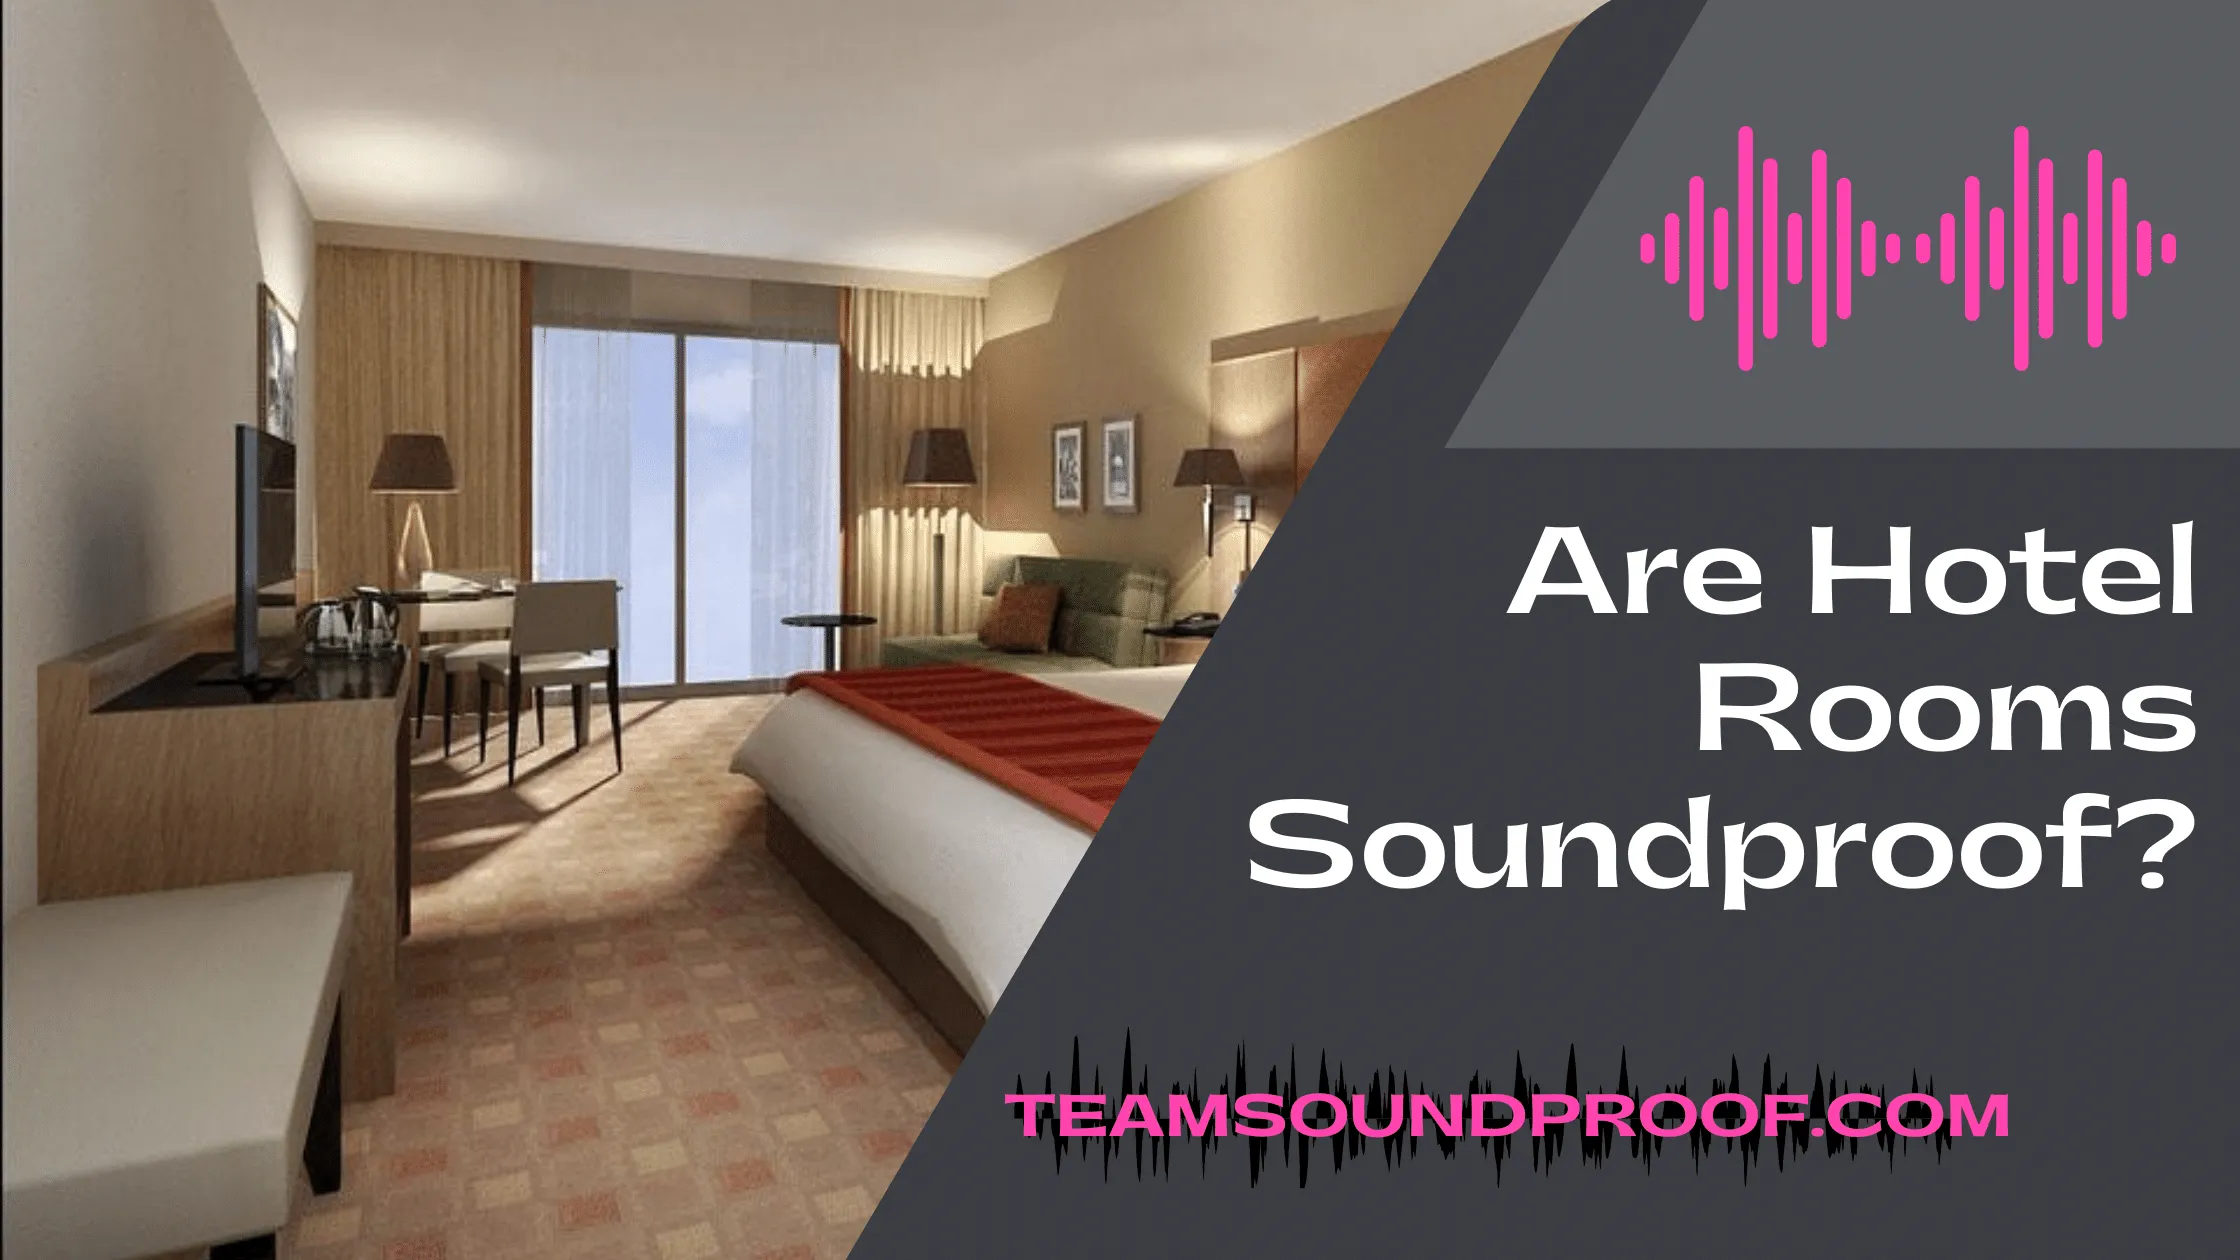 Are Hotel Rooms Soundproof? - Unique Guide